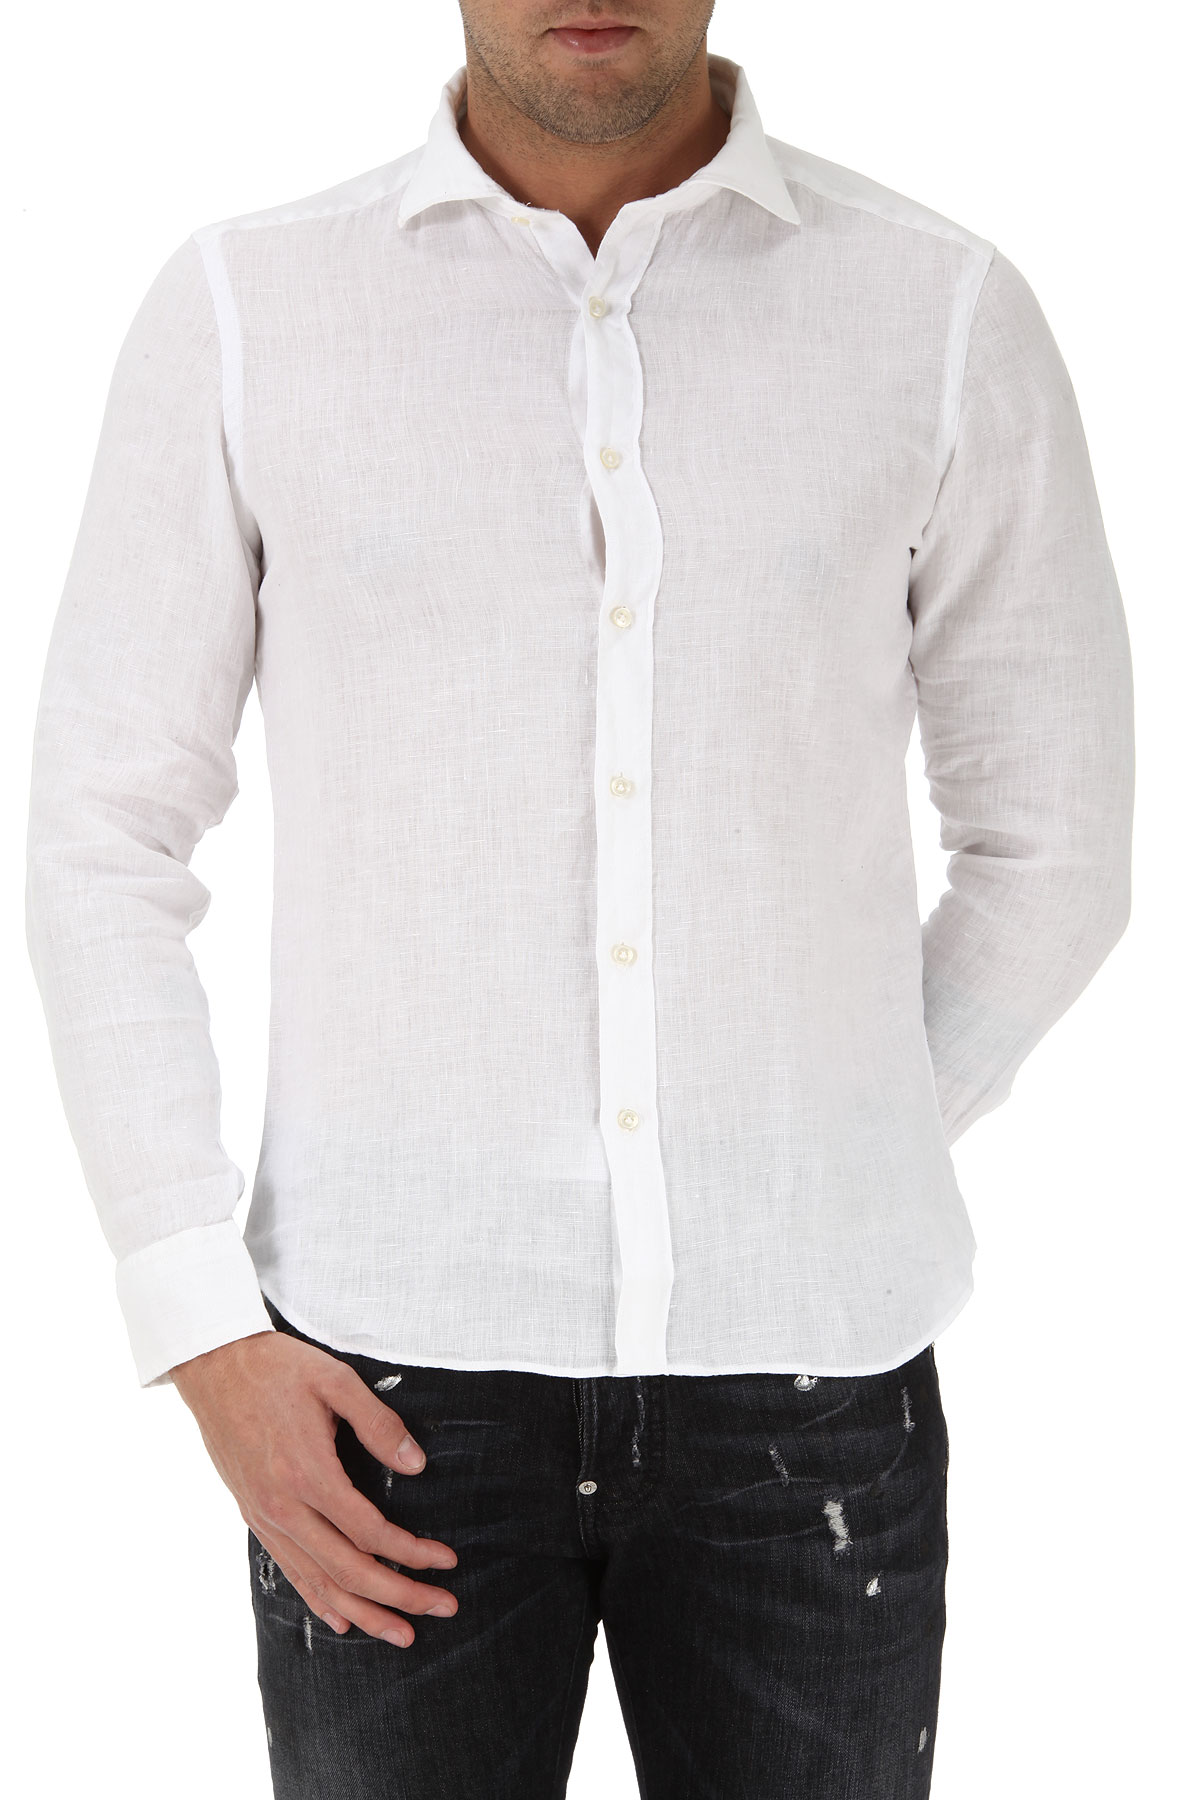 Fay Chemise Homme Outlet, Blanc, Lin, 2017, 38 42